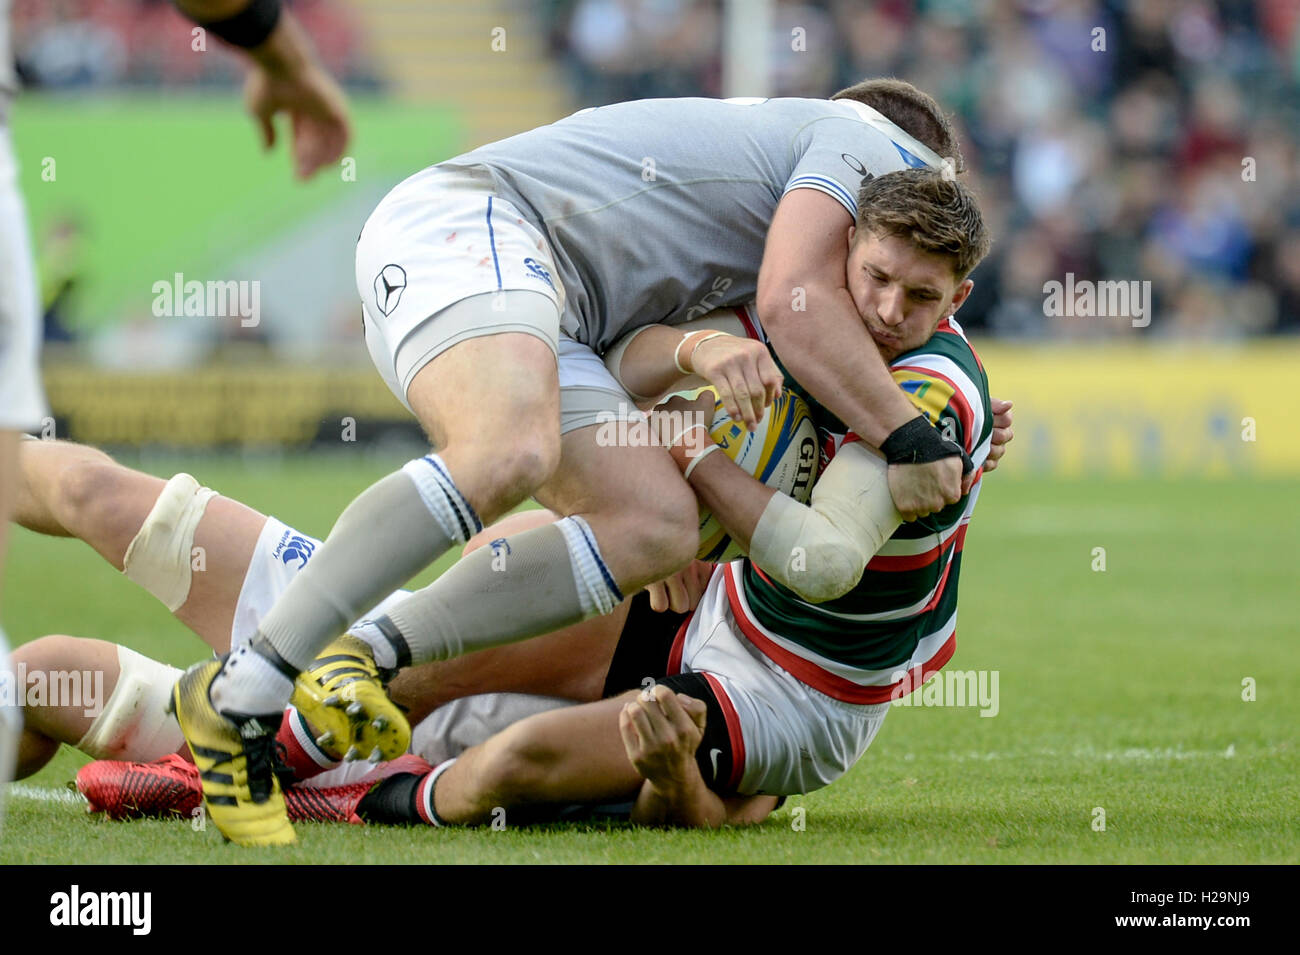 Leicester Tigers vs Bath Rugby at Welford Road, 25/09/16. Stock Photo